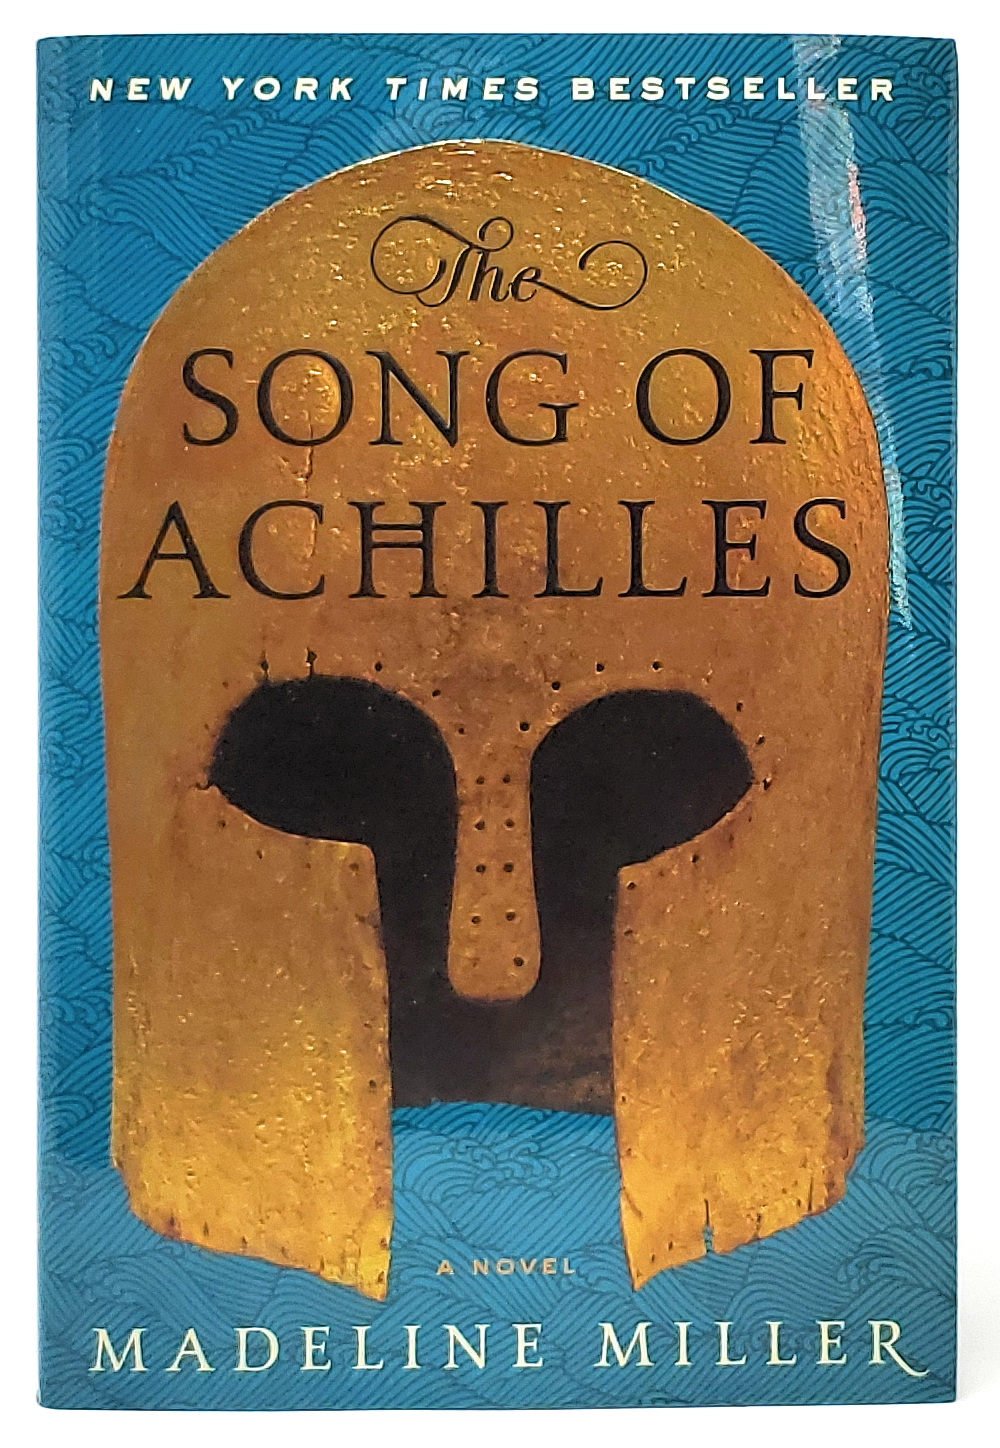 ny times book review song of achilles